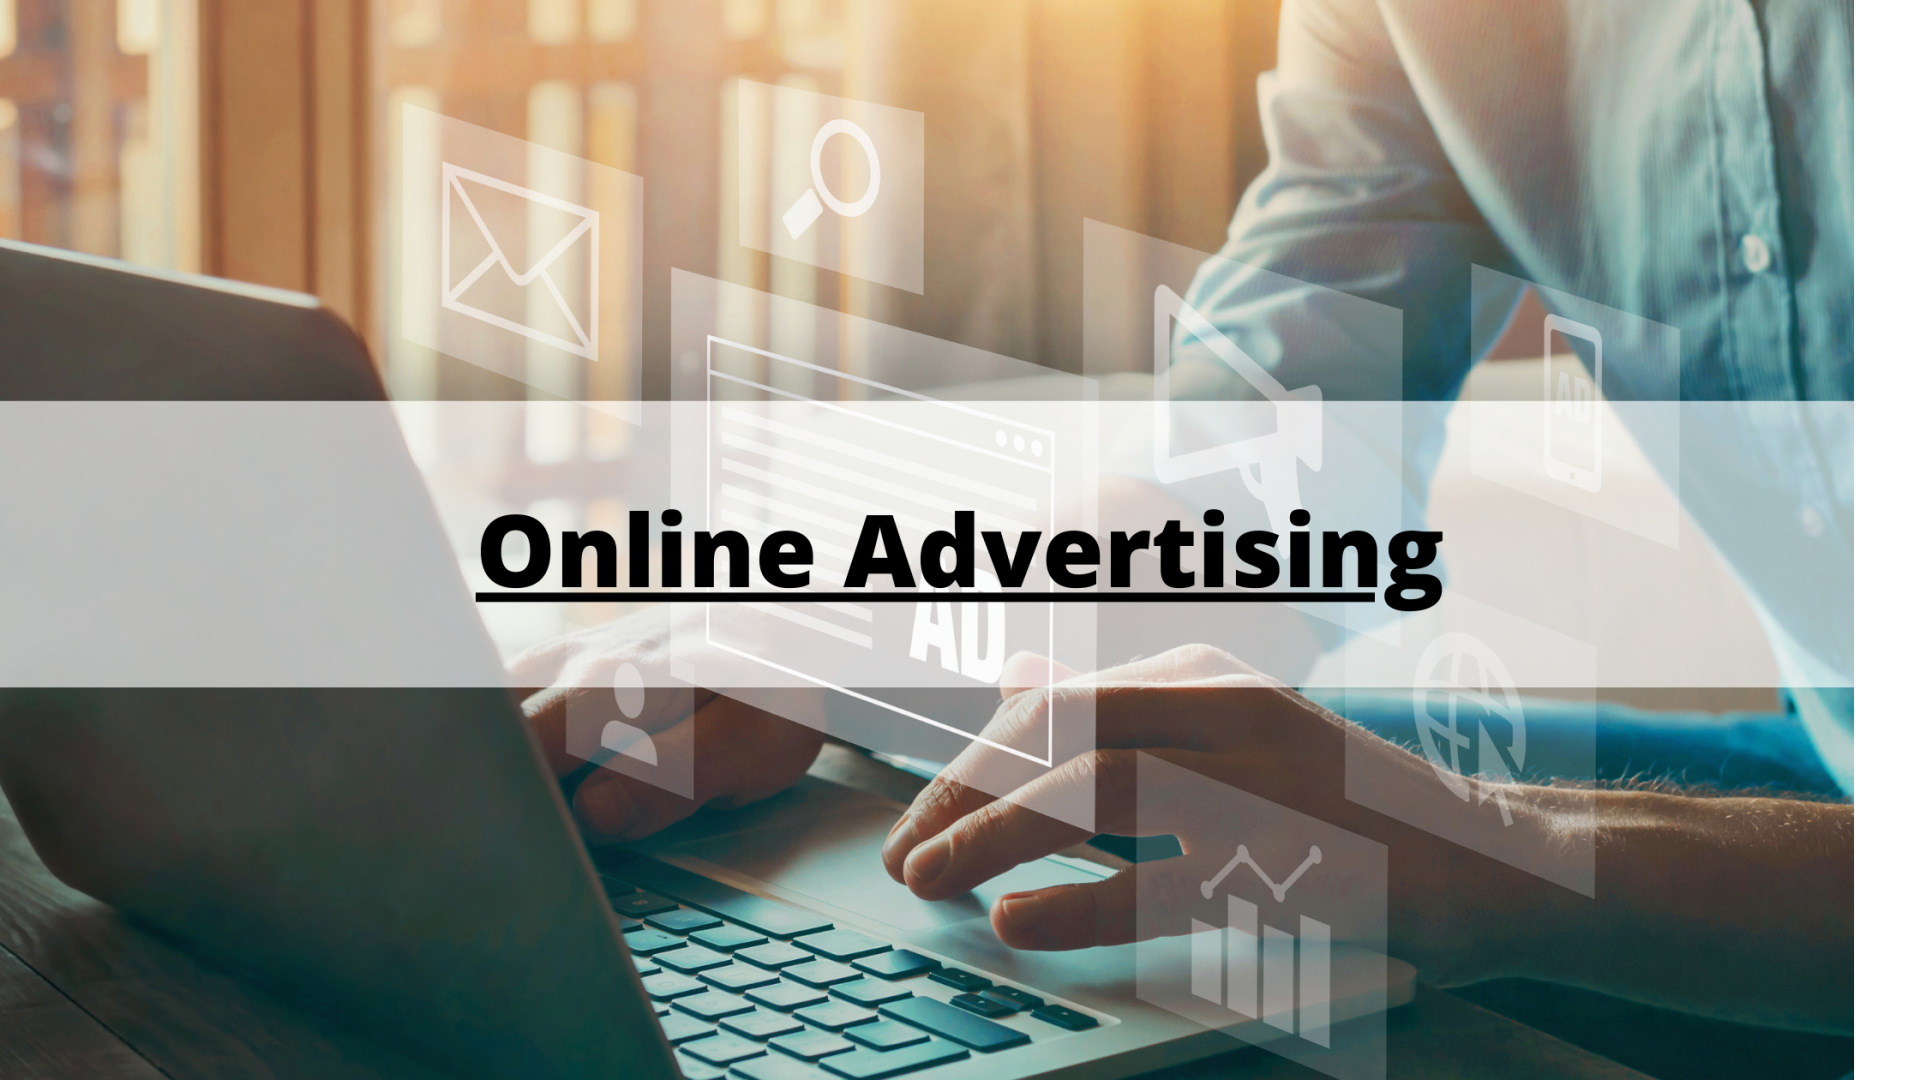 The fifth online in demand freelance skill is online advertising in 2020